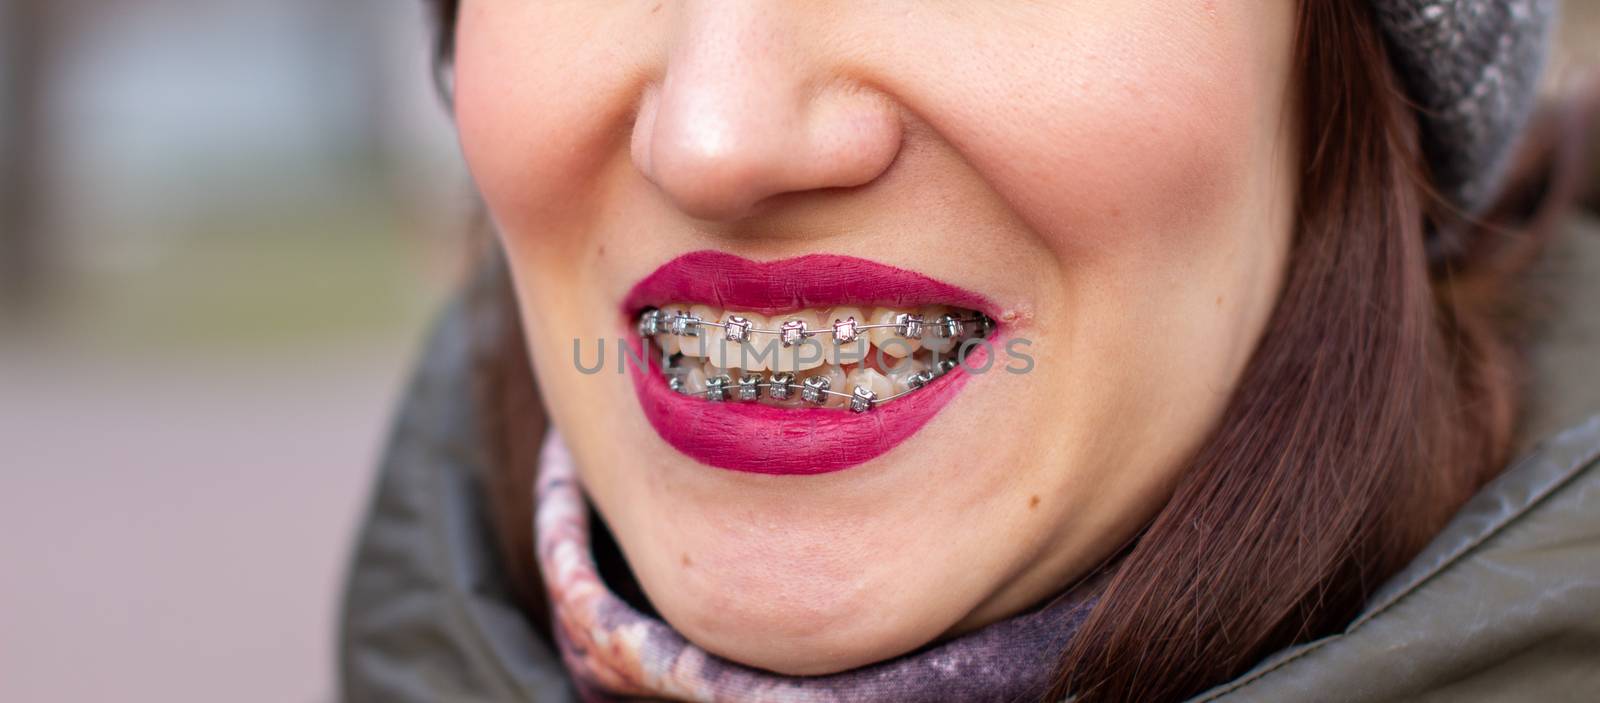 The brace system in the girl's smiling mouth, macro photography of teeth, close-up of red lips. Girl walking on the street